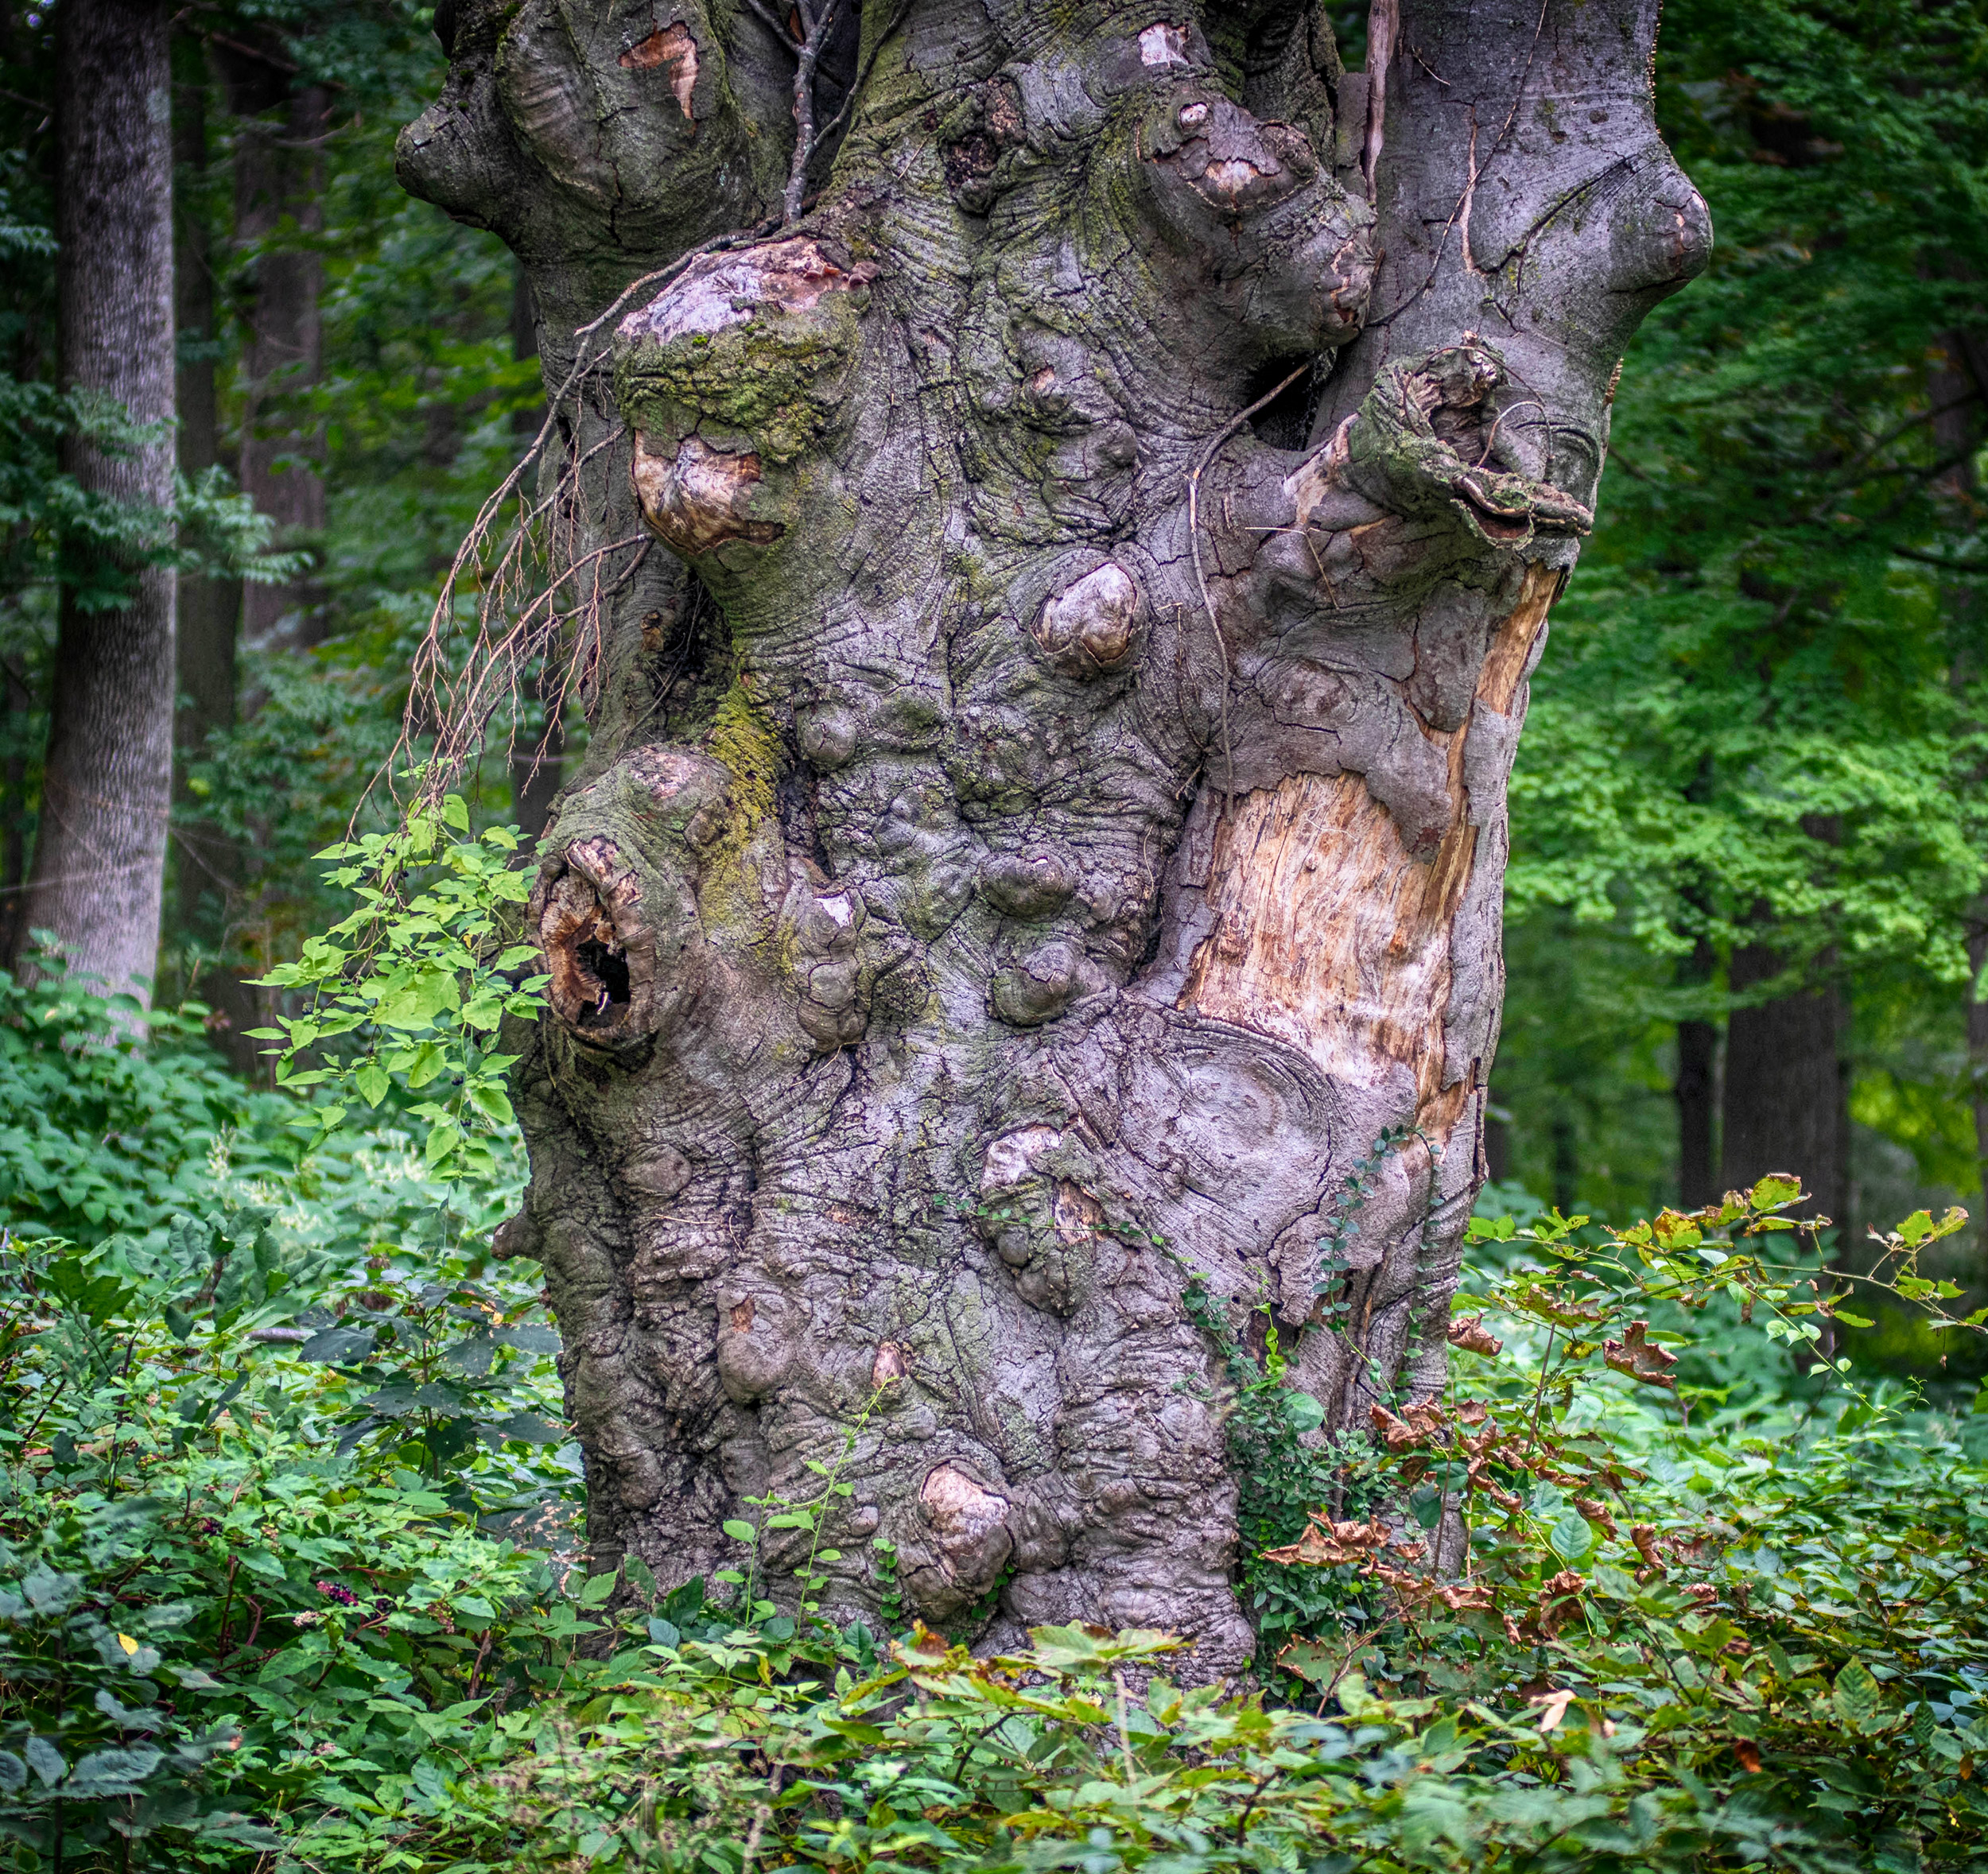 Tree trunk in the Hadwen Arboretum with gnarled bark exposing the tree underneath in places